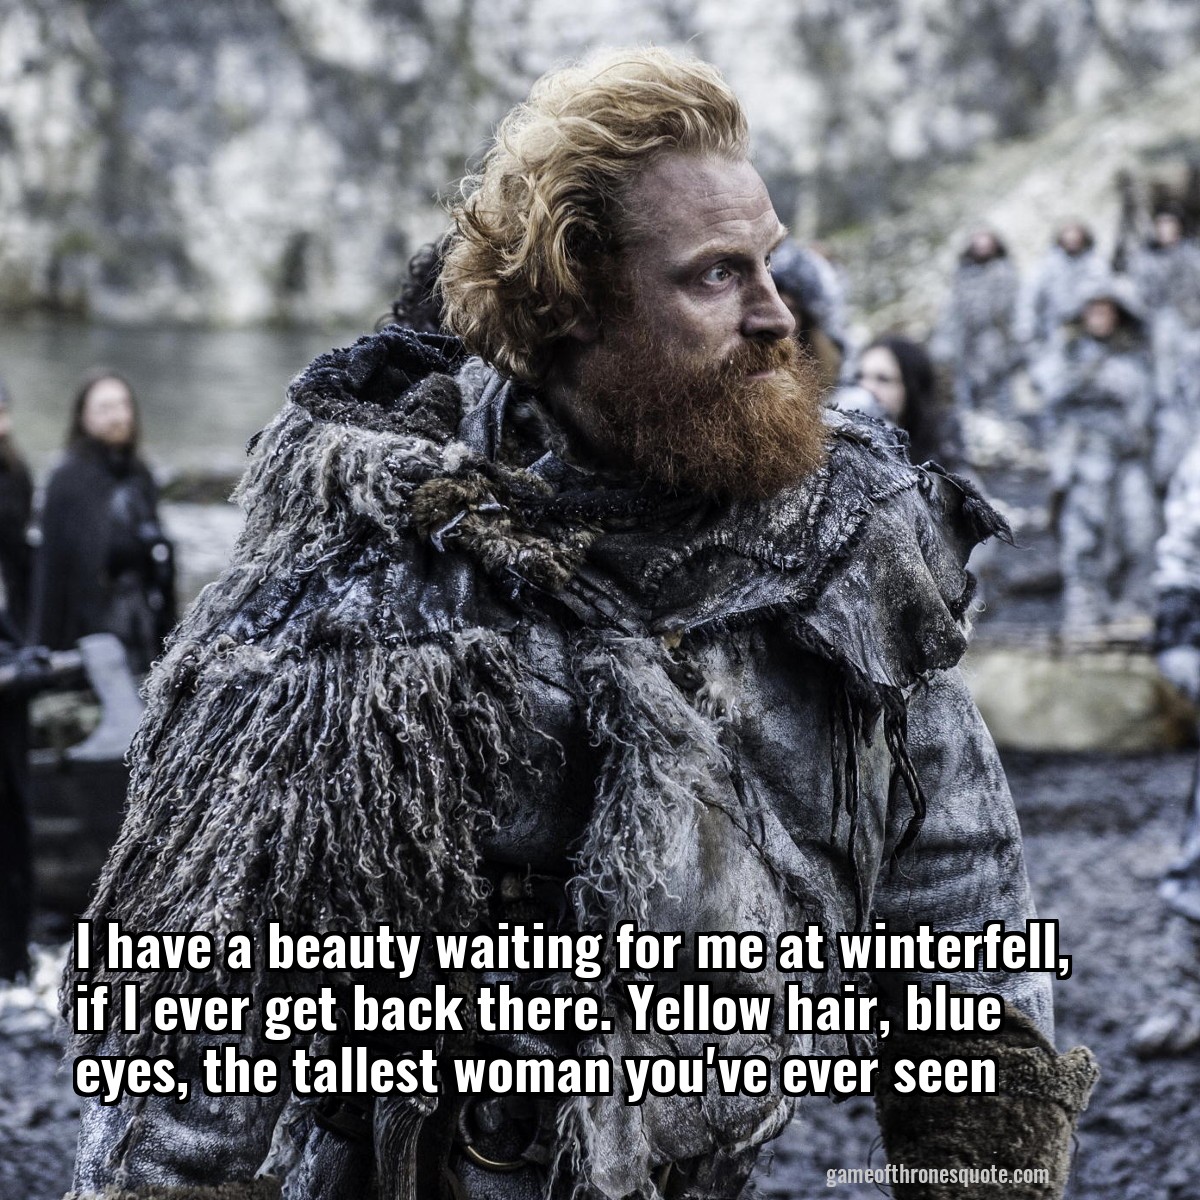 I have a beauty waiting for me at winterfell, if I ever get back there. Yellow hair, blue eyes, the tallest woman you've ever seen